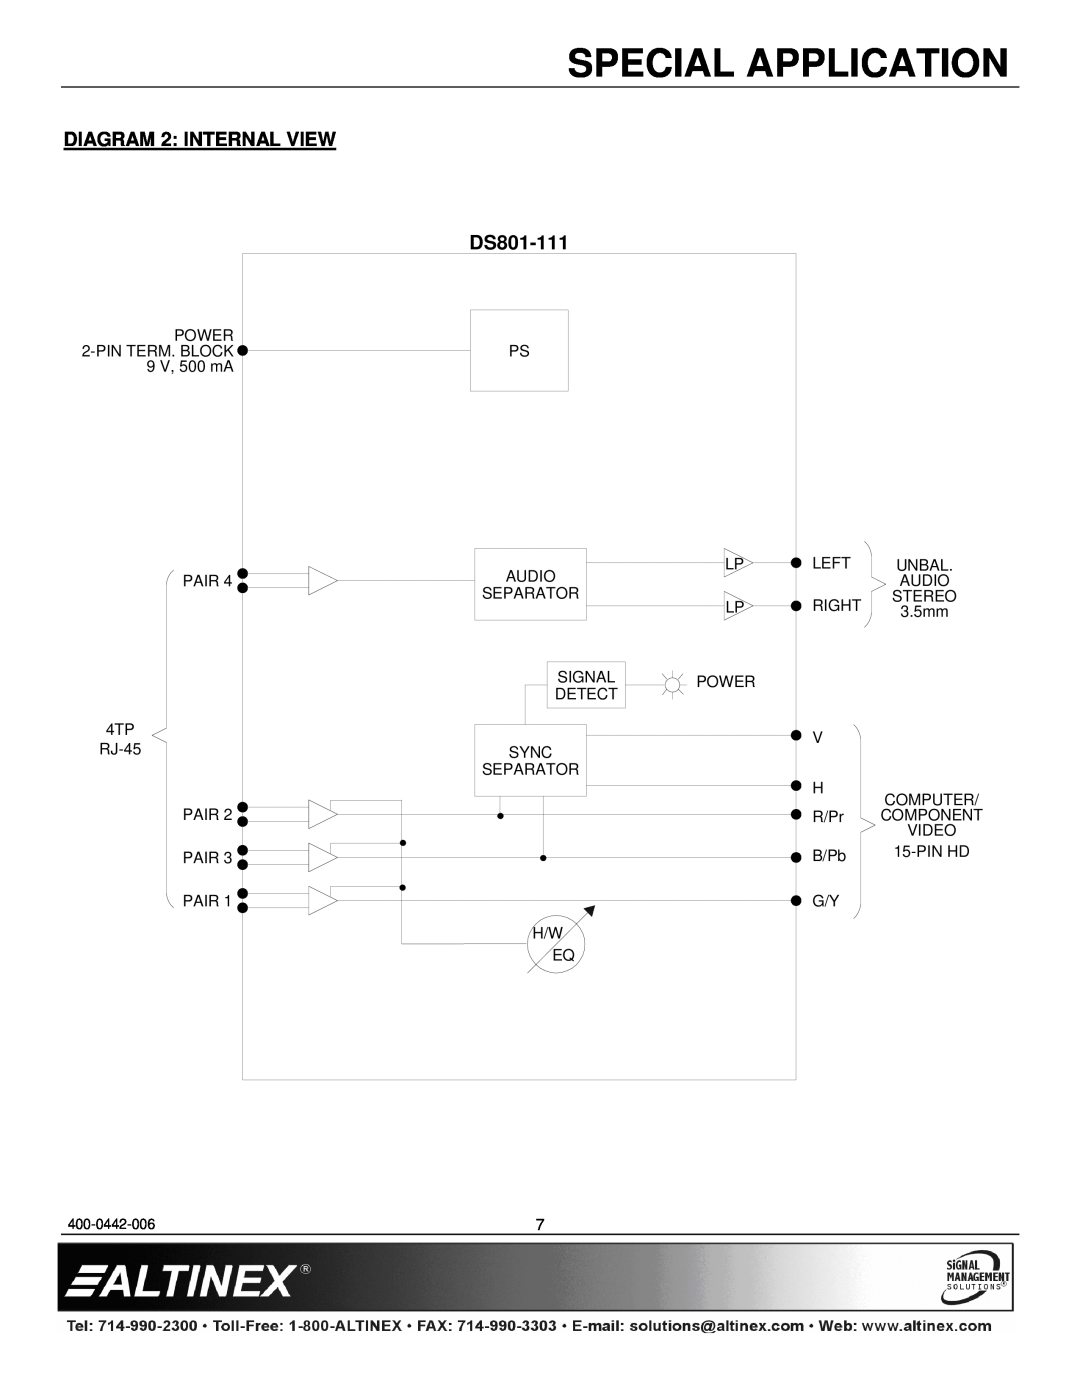 Altinex DS801-111 manual DIAGRAM 2 INTERNAL VIEW, Special Application 